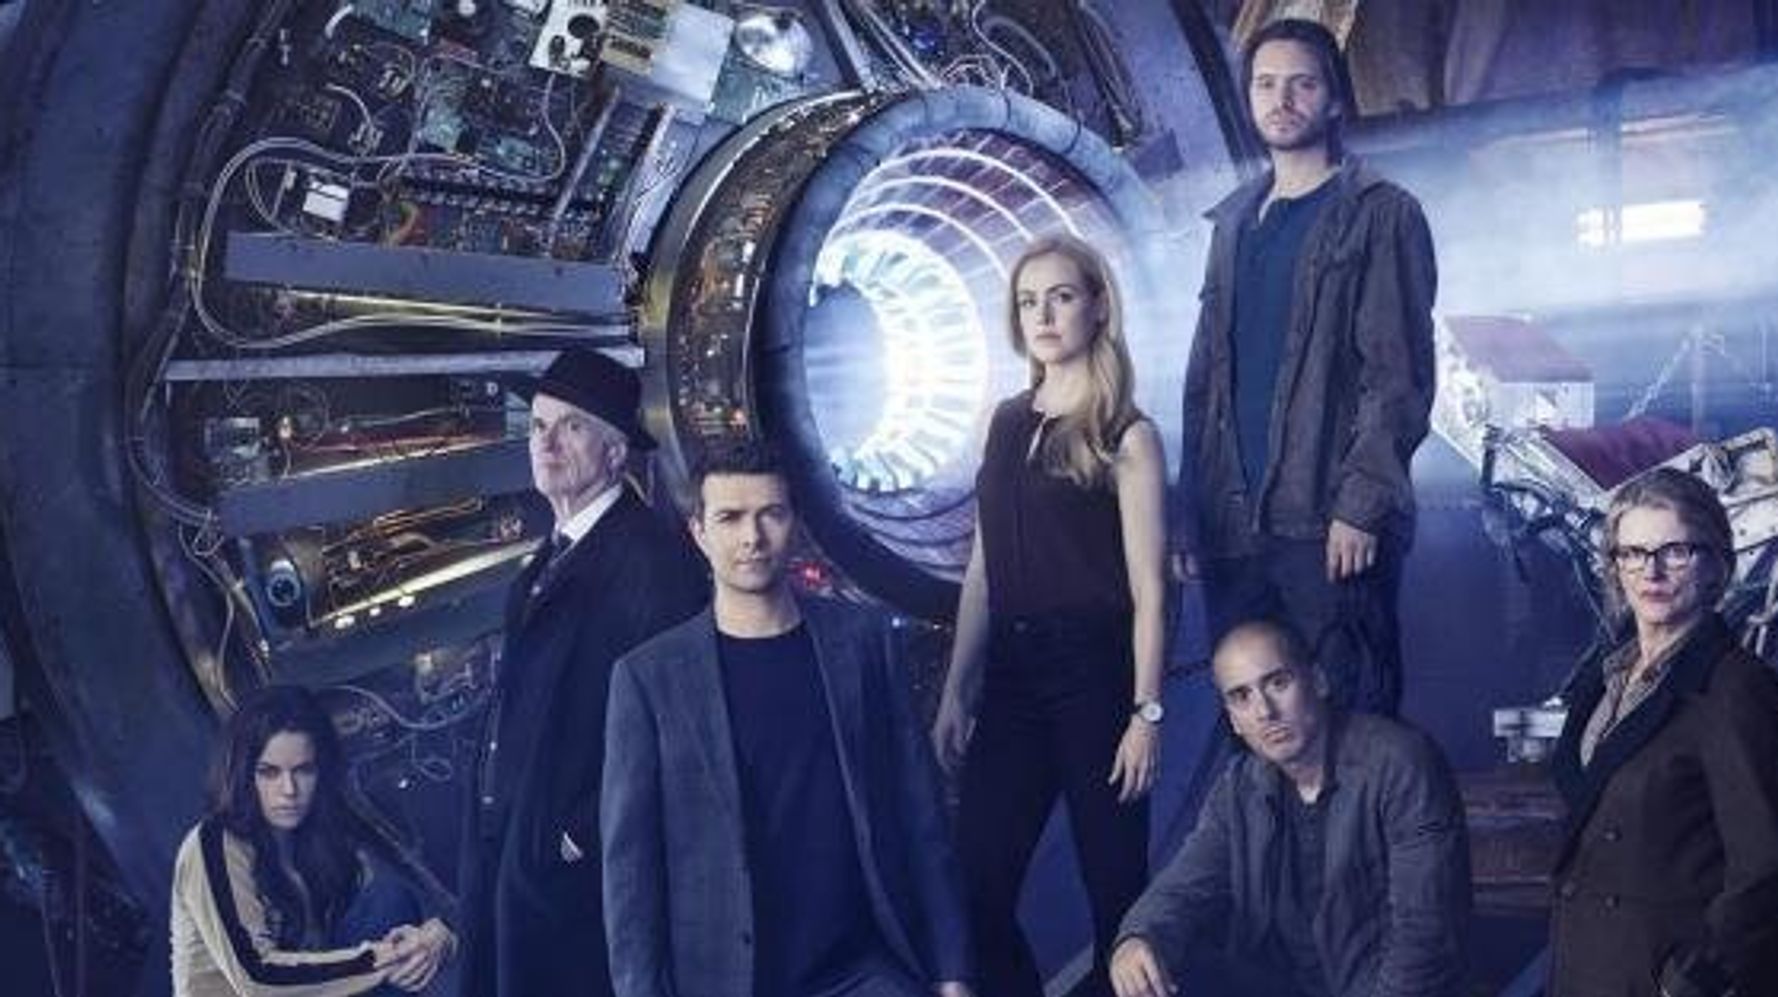 '12 Monkeys': 10 Things To Know About The Sci-Fi Movie-Turned-TV Show